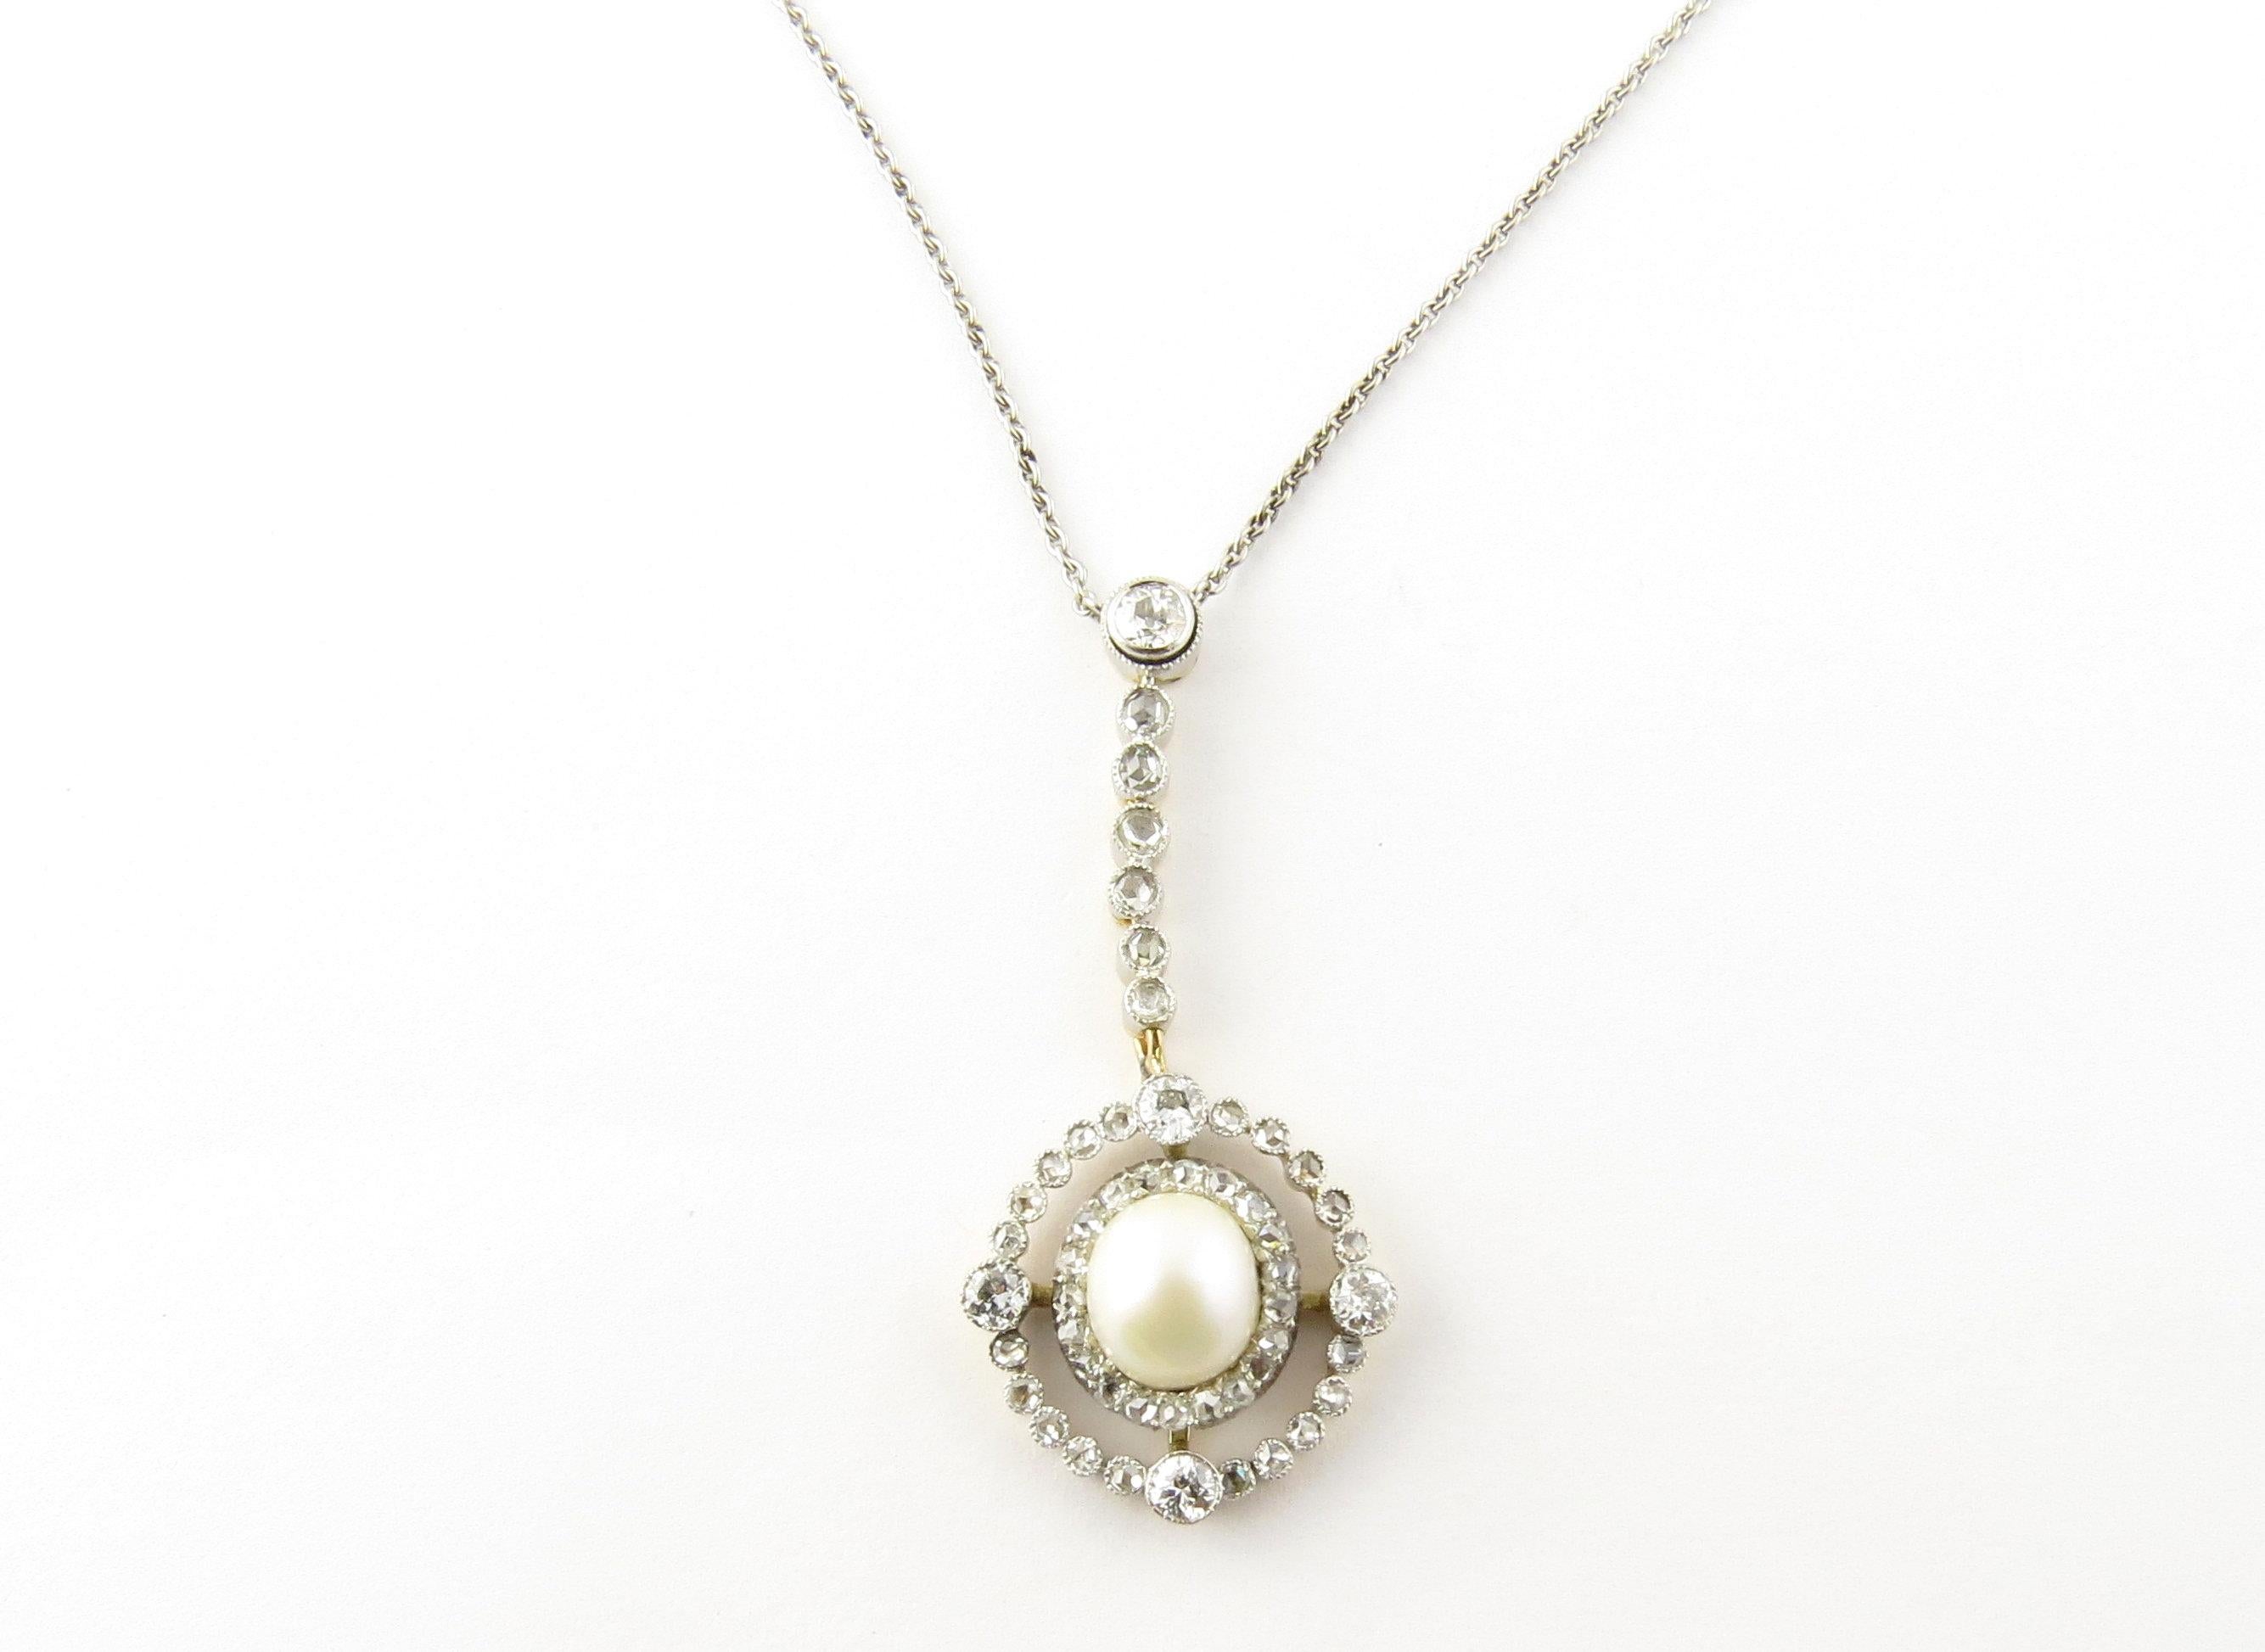 Vintage 14 Karat White Gold Pearl and Diamond Pendant Necklace. This stunning pendant features one 7 mm cultured pearl accented with 51 round European cut diamonds set in classic 14K white gold. Suspended from a 14K white gold necklace. Circa